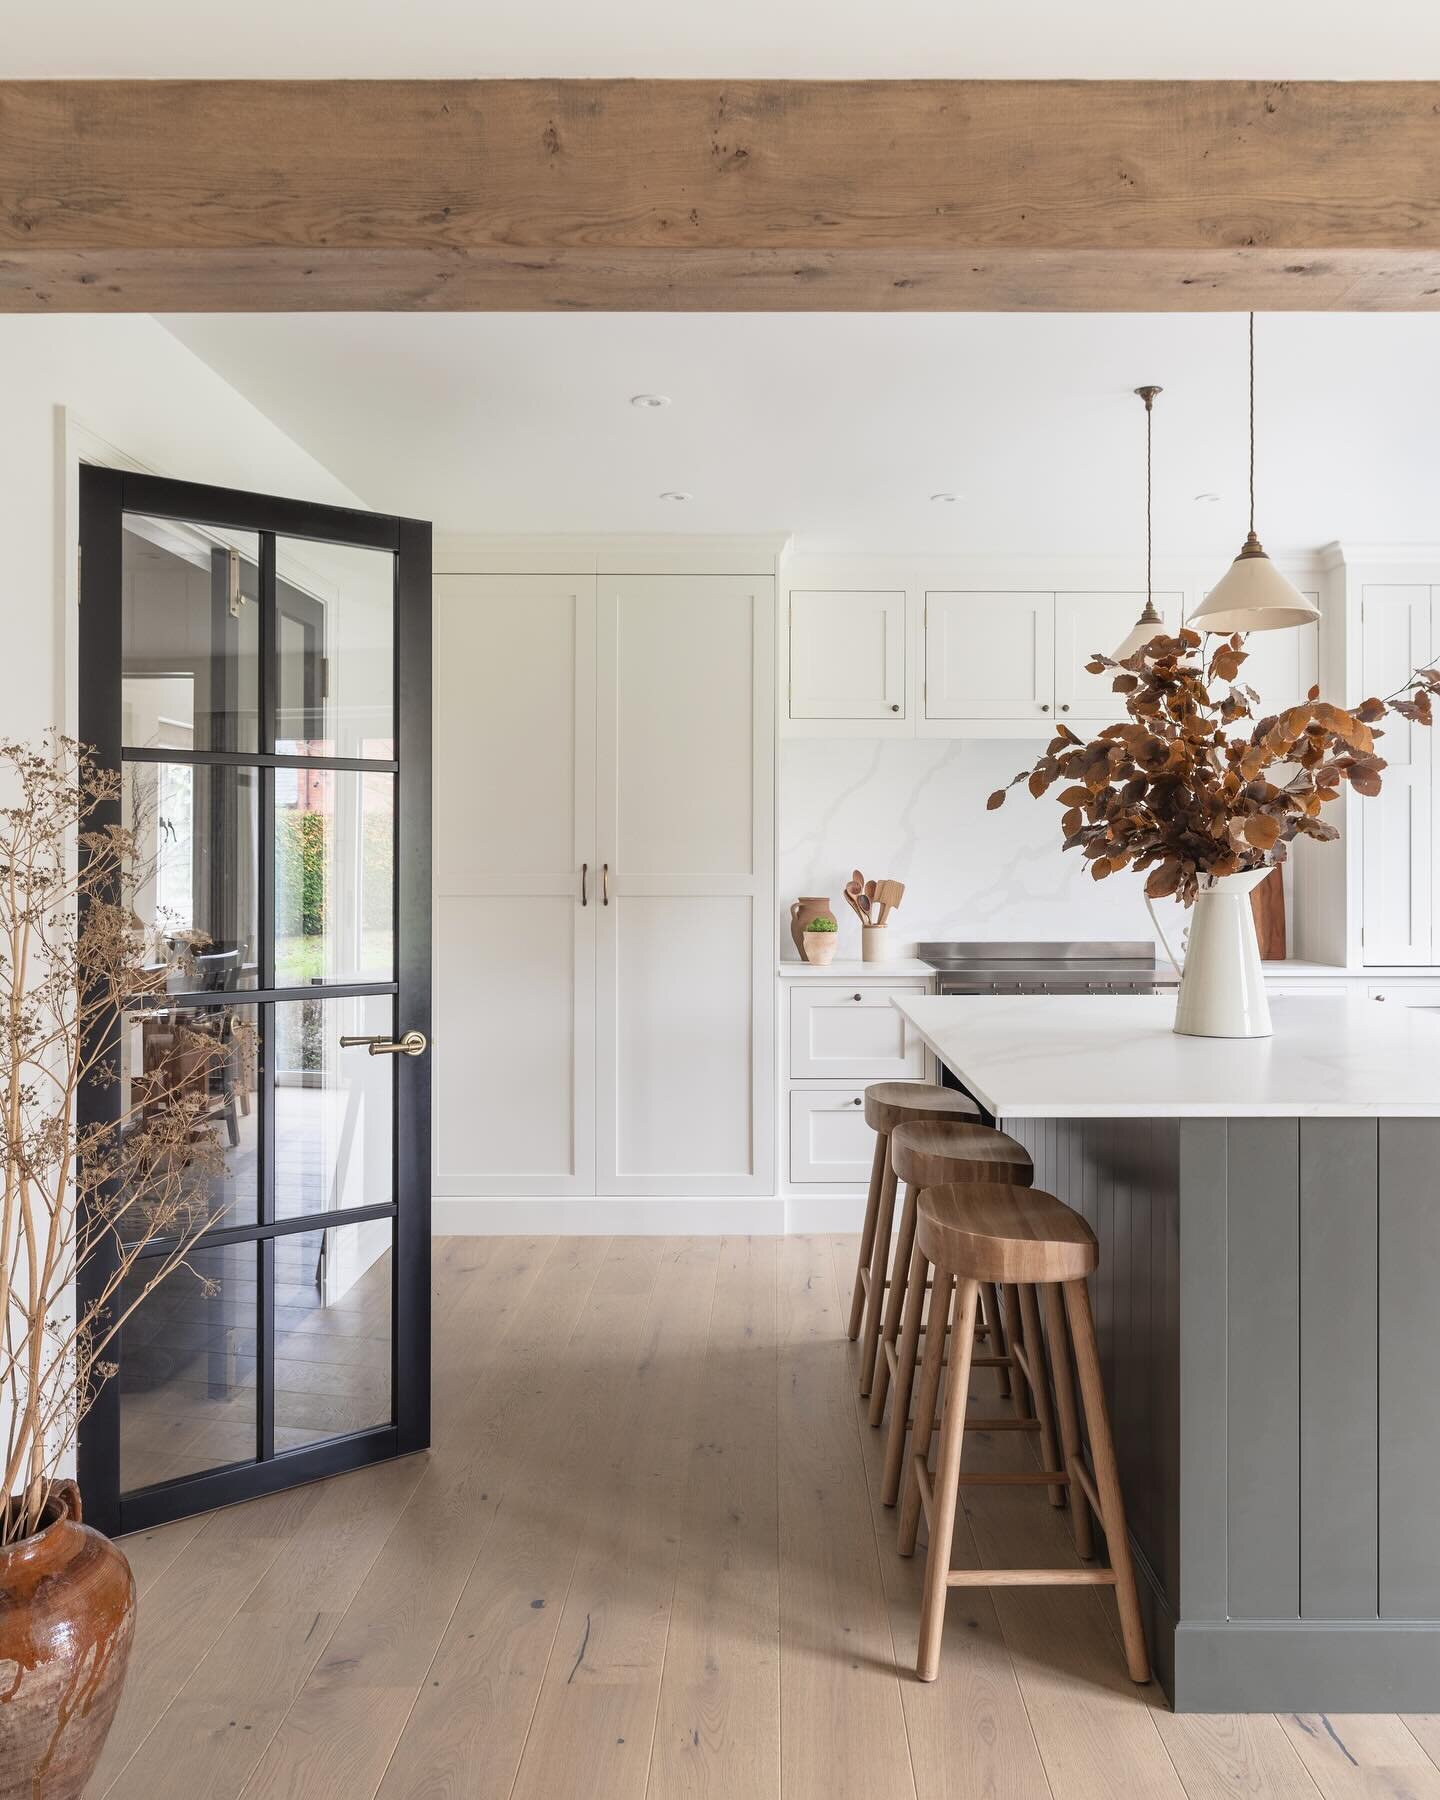 A favourite view of this recently installed kitchen nestled in the Shropshire countryside. Natural earthy tones paired with beautiful cabinetry by Christopher Johnson Kitchens makes for a classic and sophisticated space which will stand the test of t